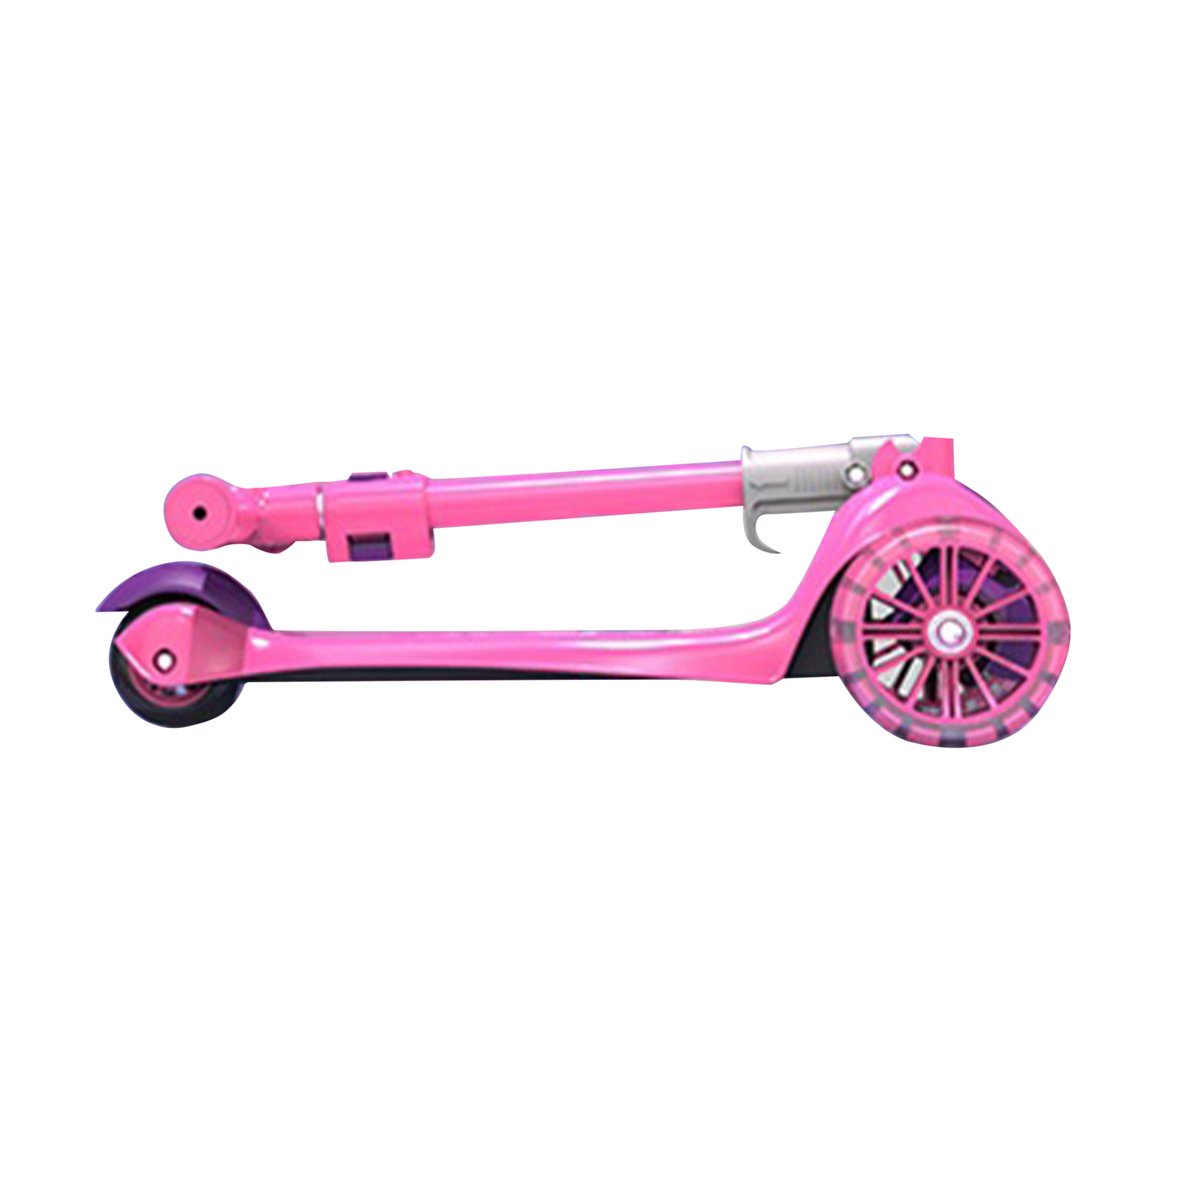 Skid Fusion Kick Scooter 3Wheel S949 Pink